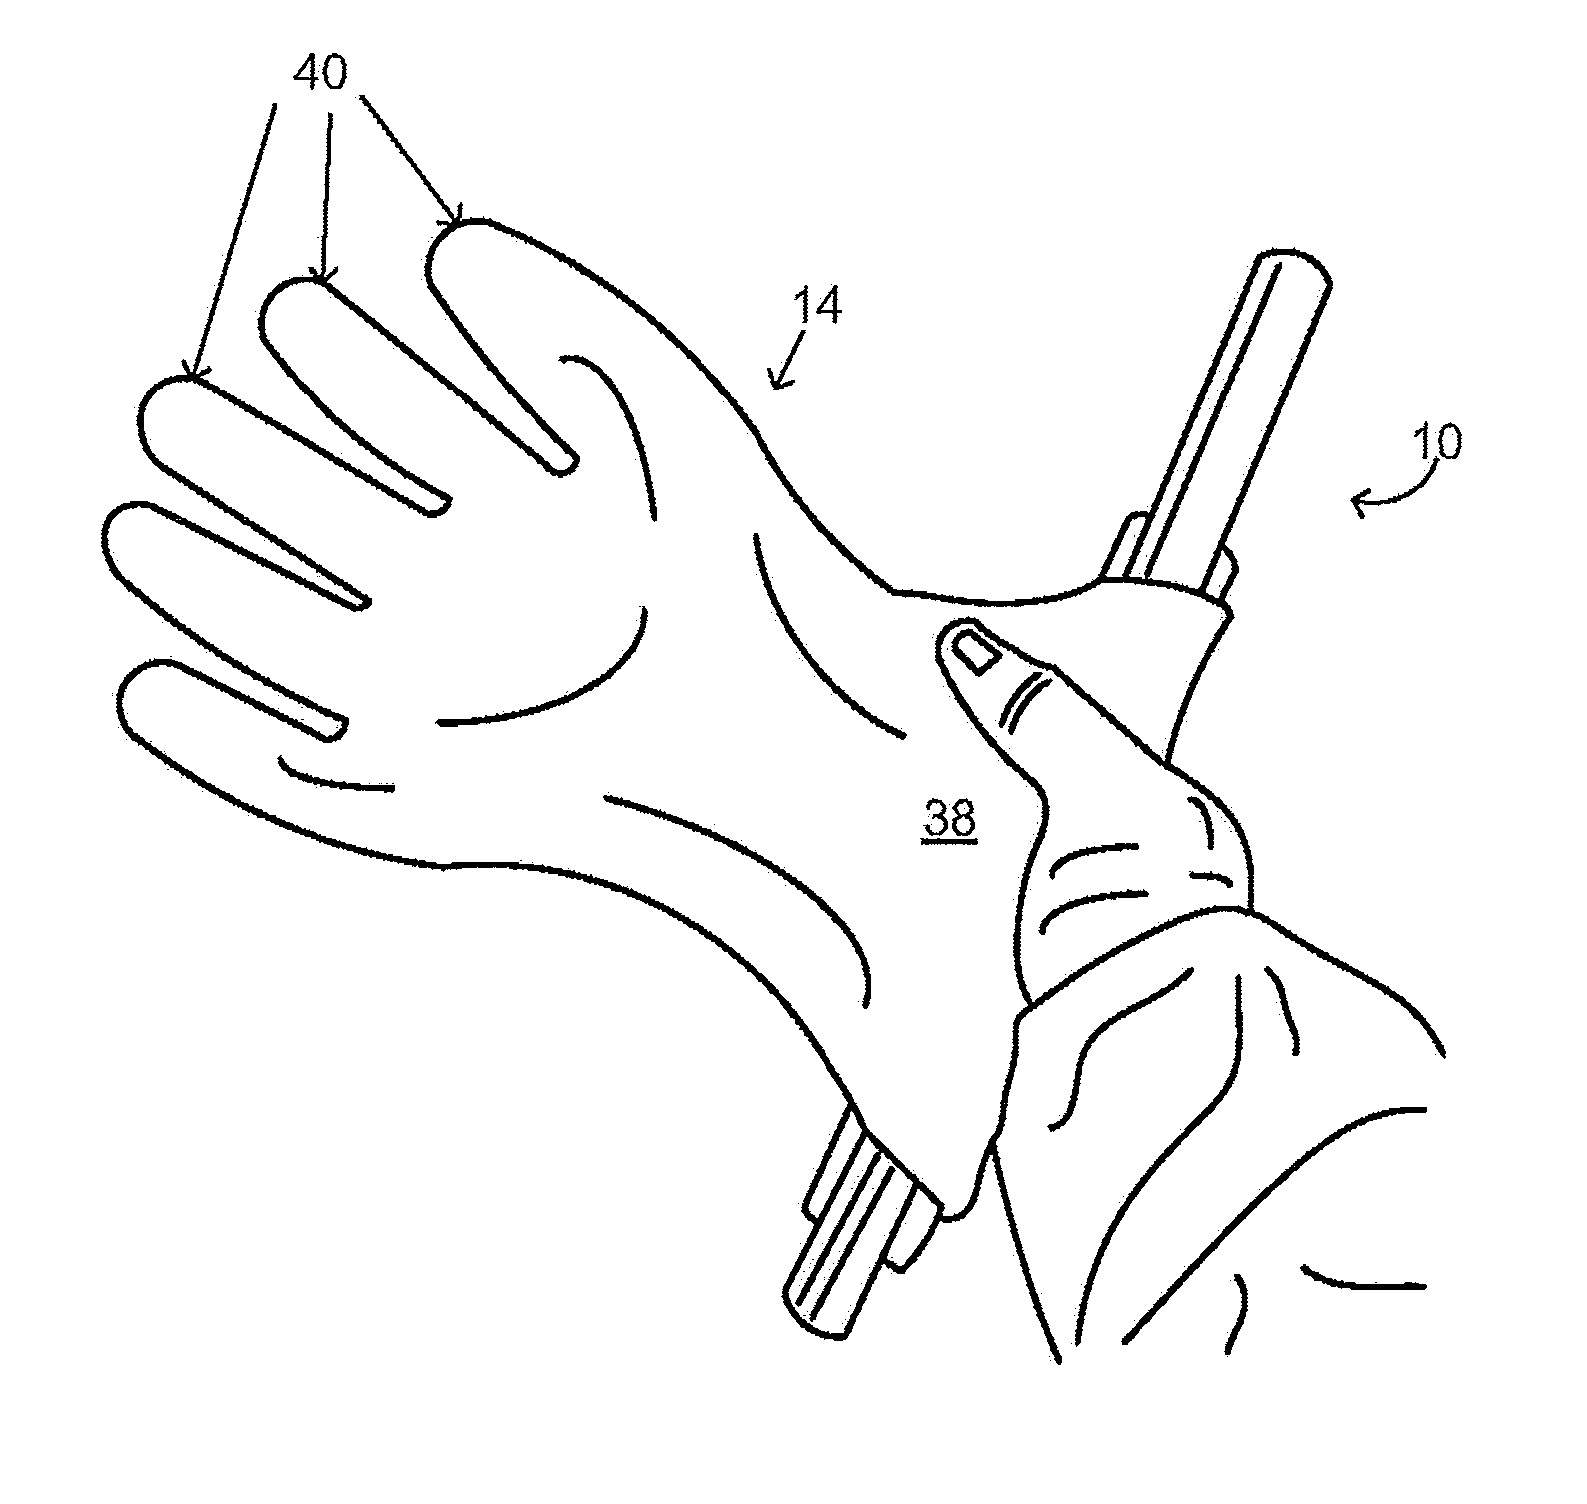 Glove testing device and method